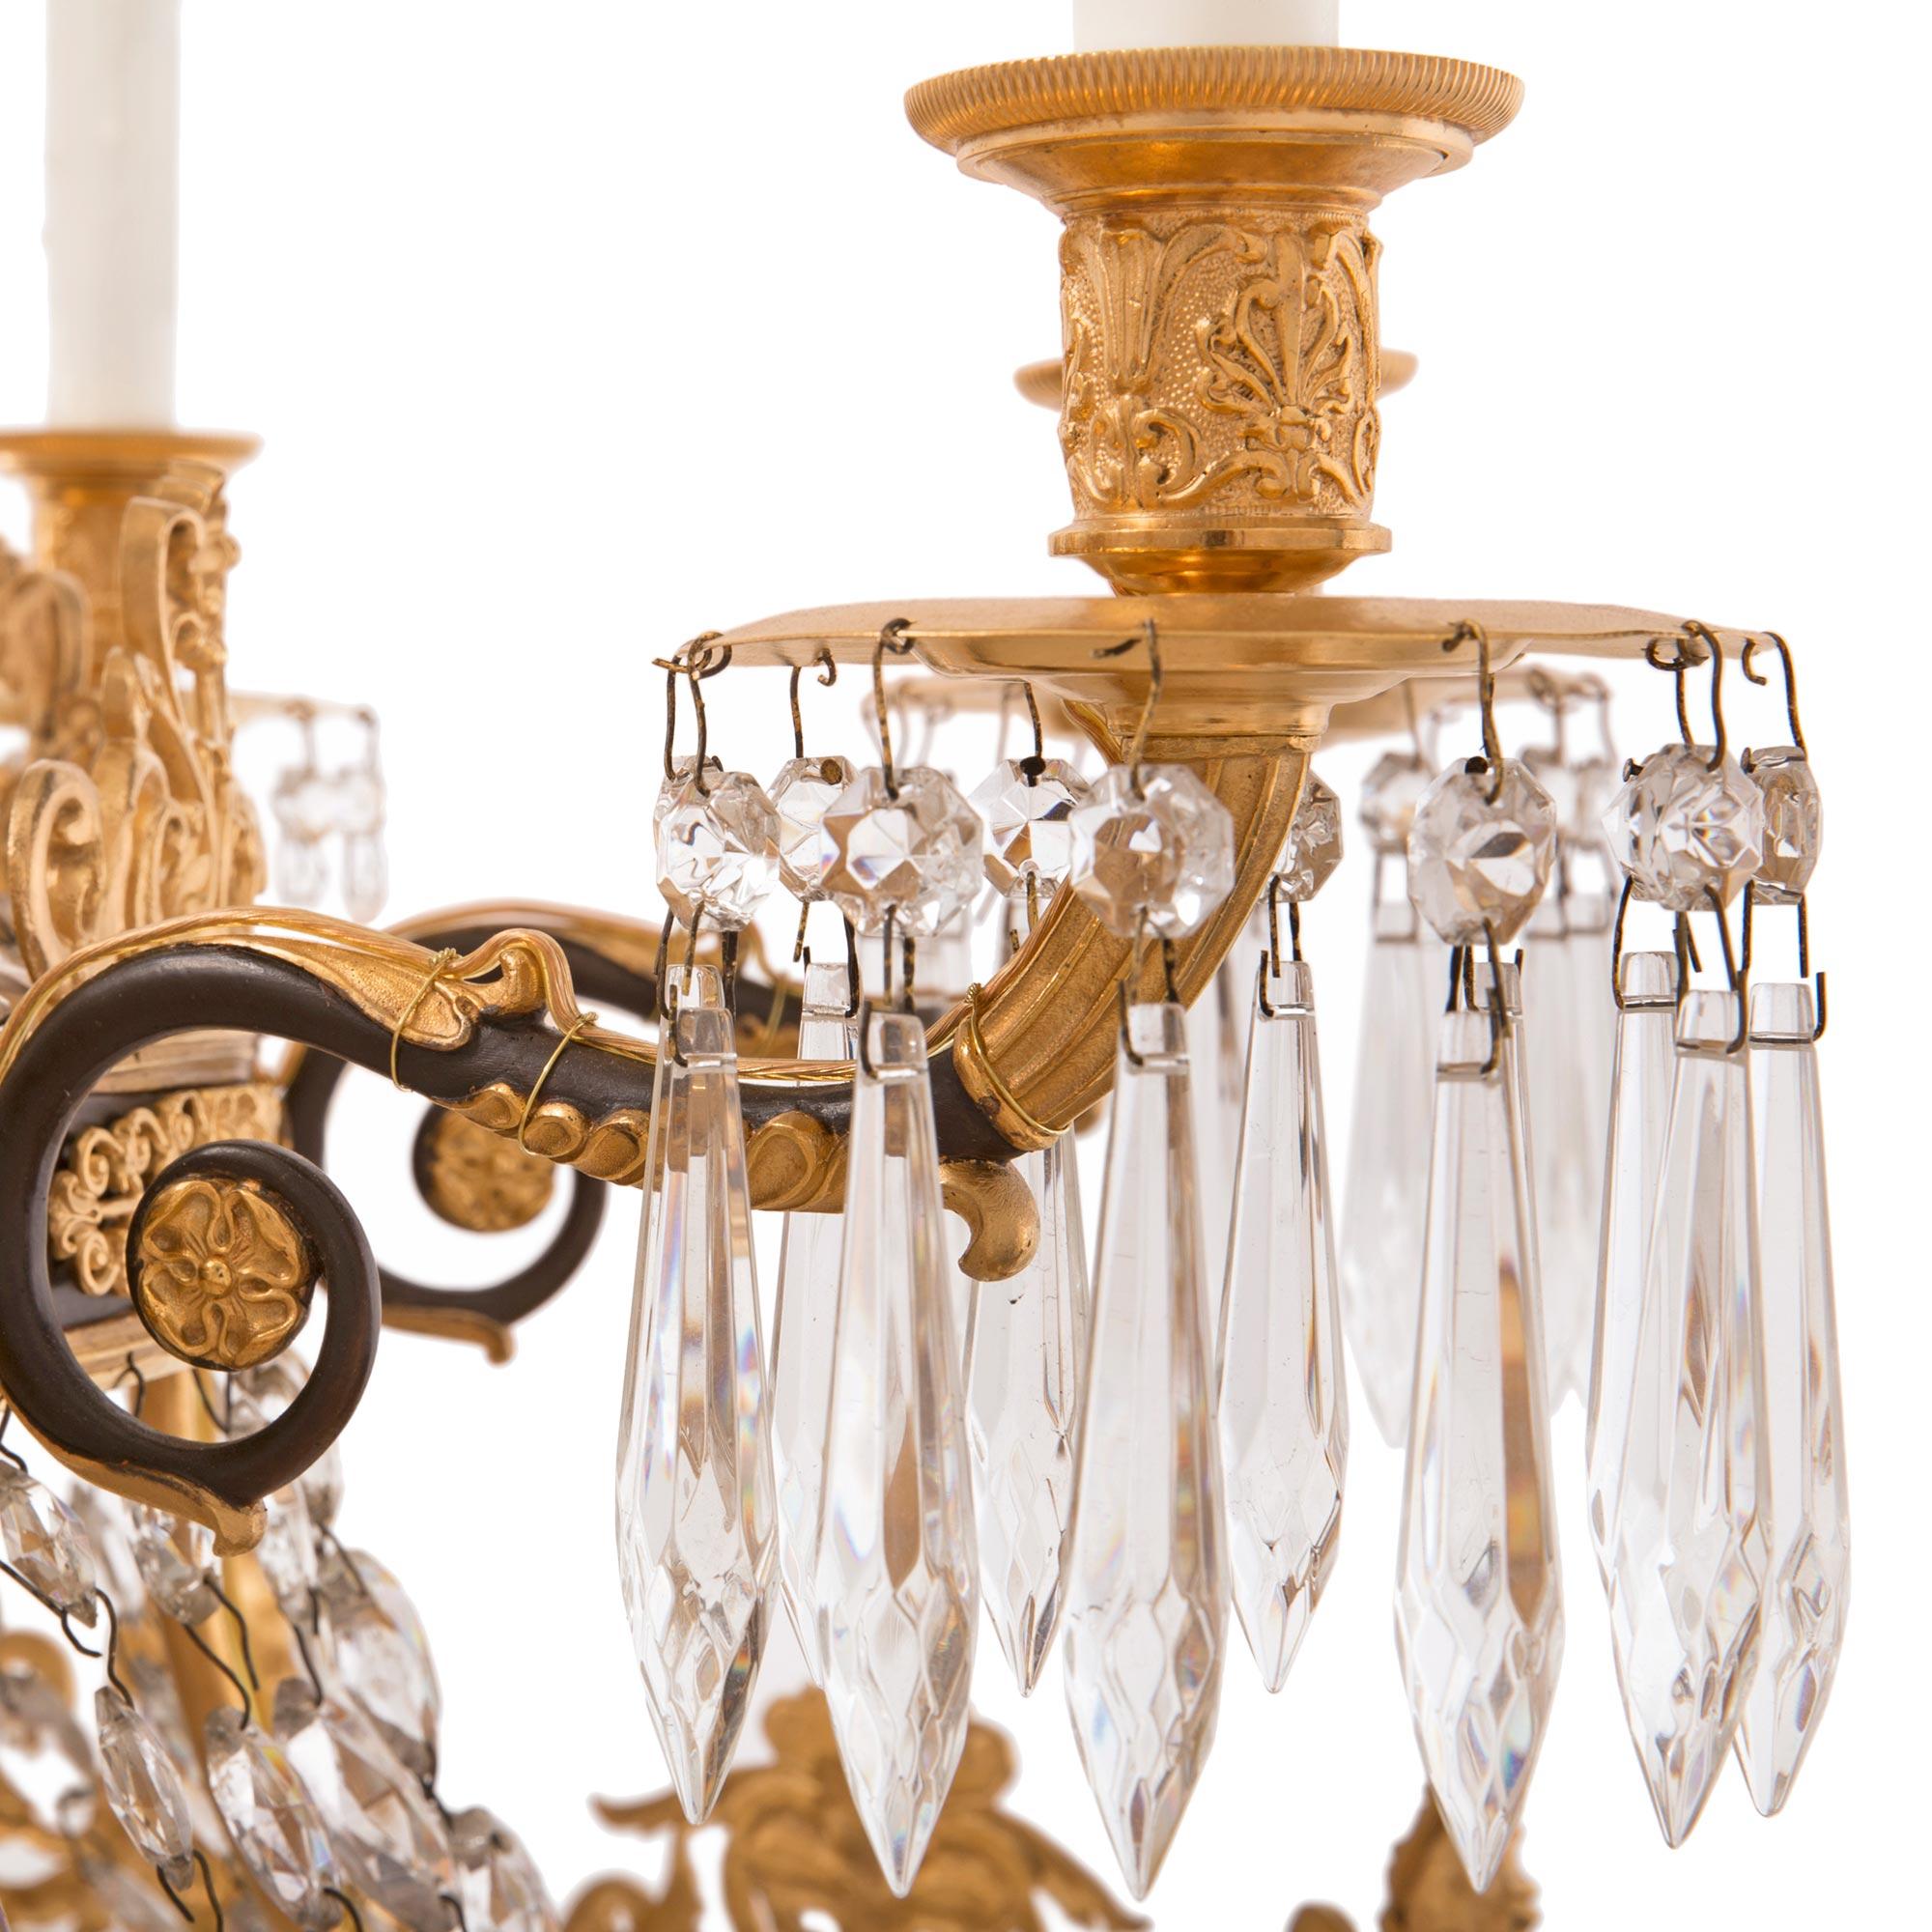 Baltic 19th Century Empire St. Ormolu, Patinated Bronze and Crystal Chandelier For Sale 3